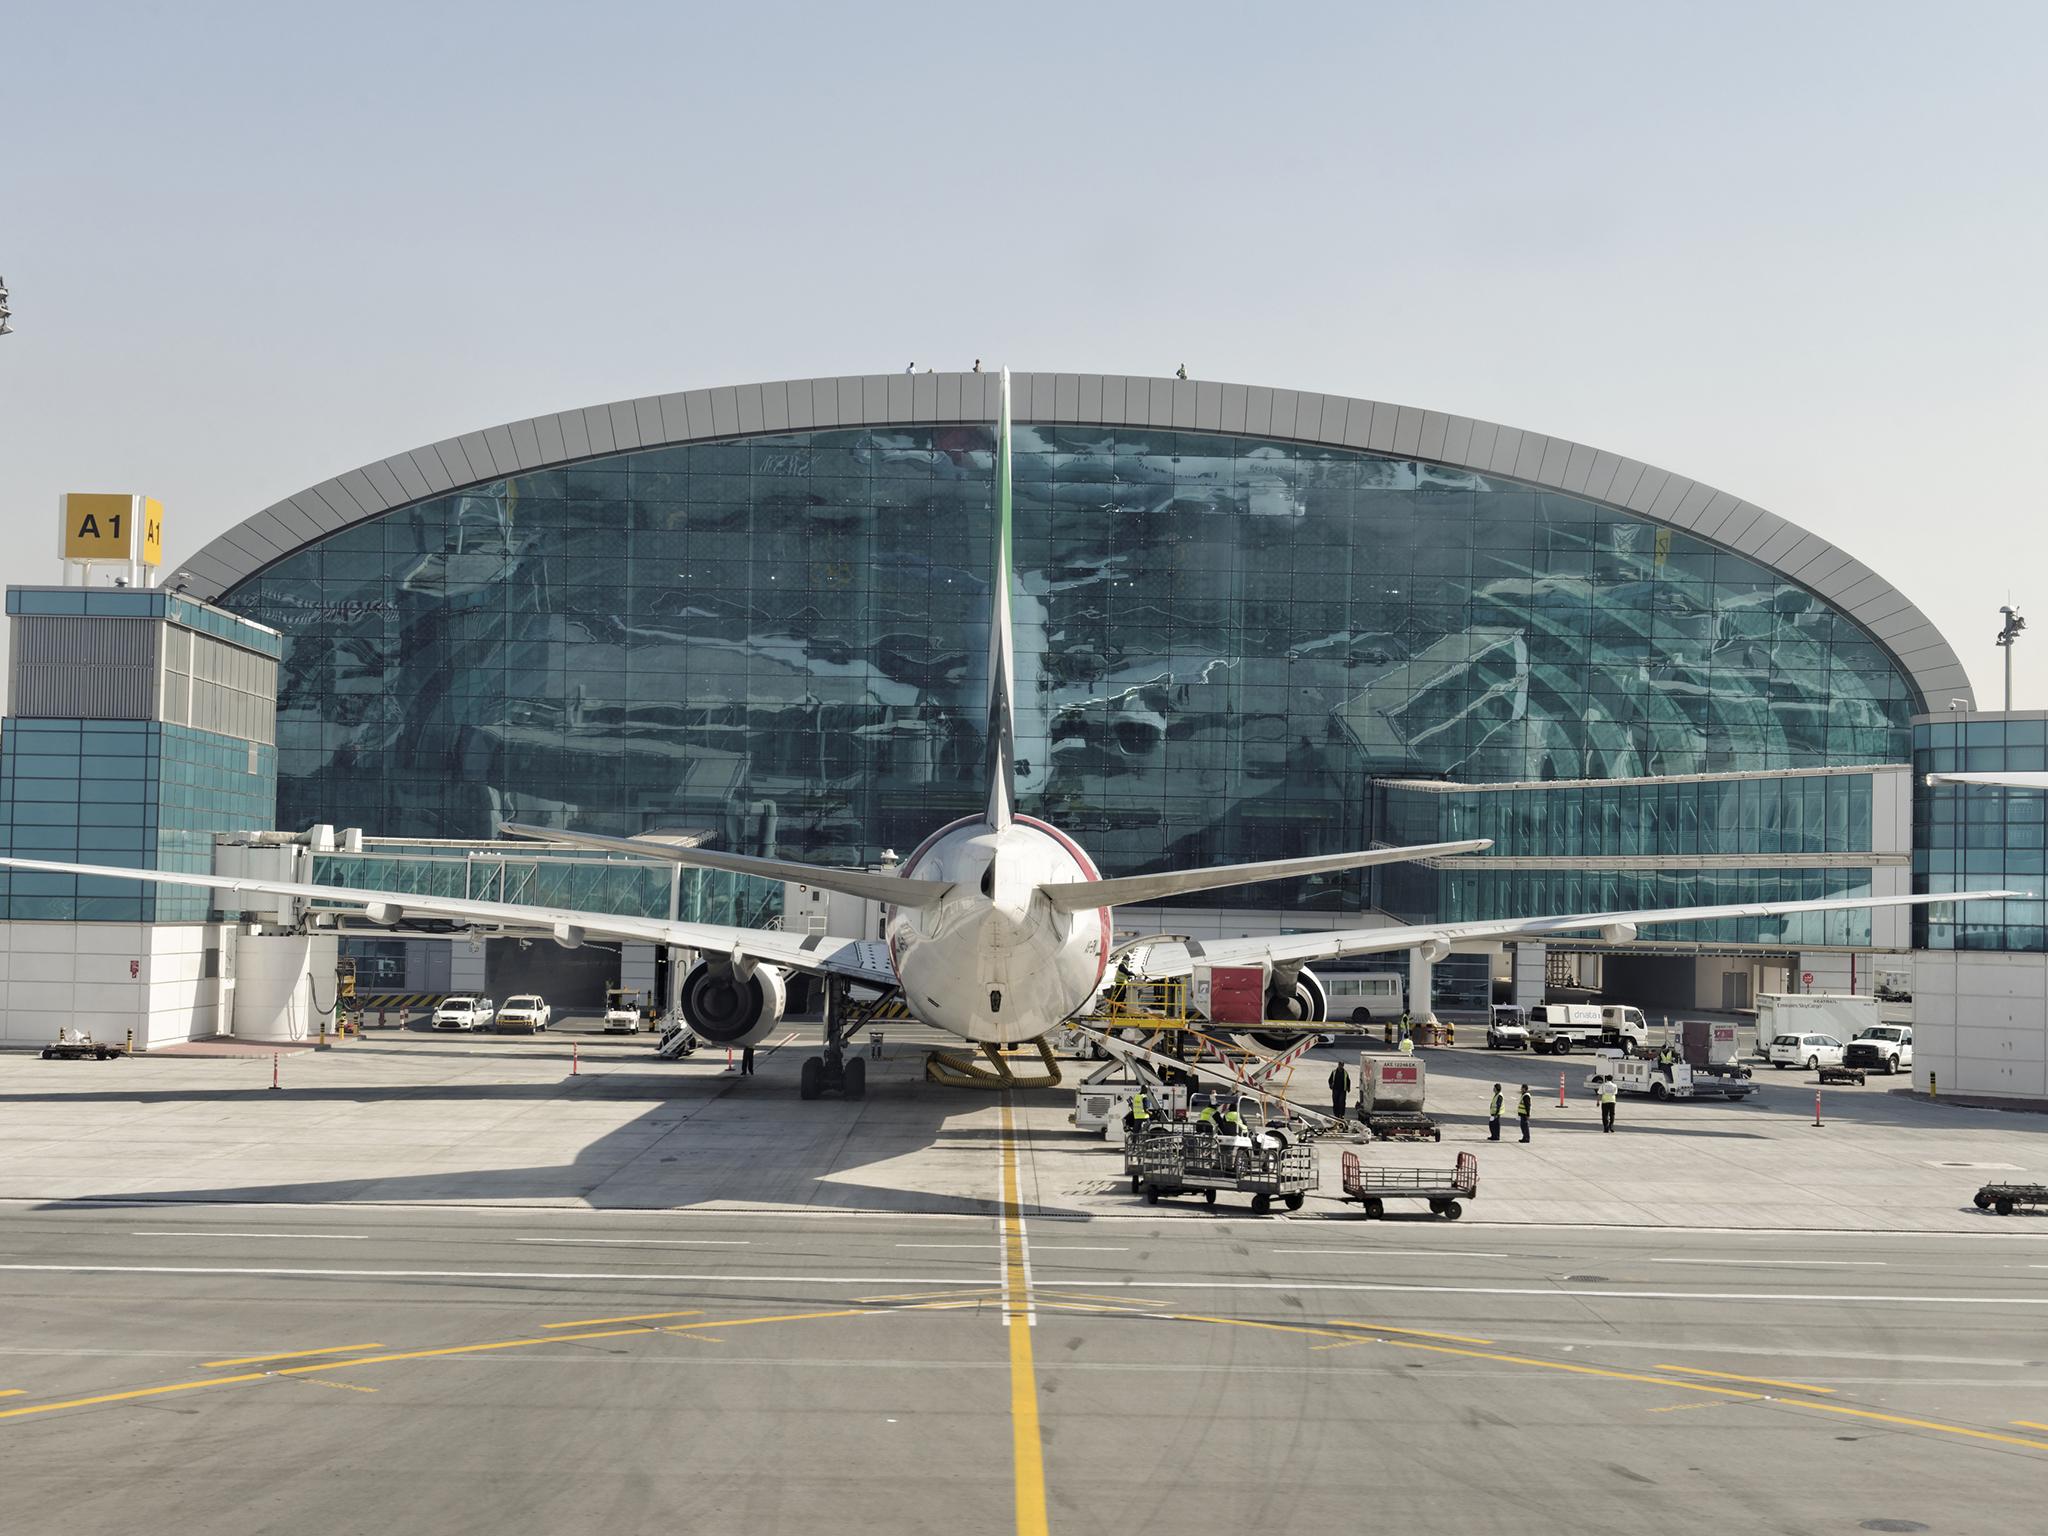 Dubai airport: the UAE’s list of ‘controlled’ medicines includes some drugs available over the counter in other countries